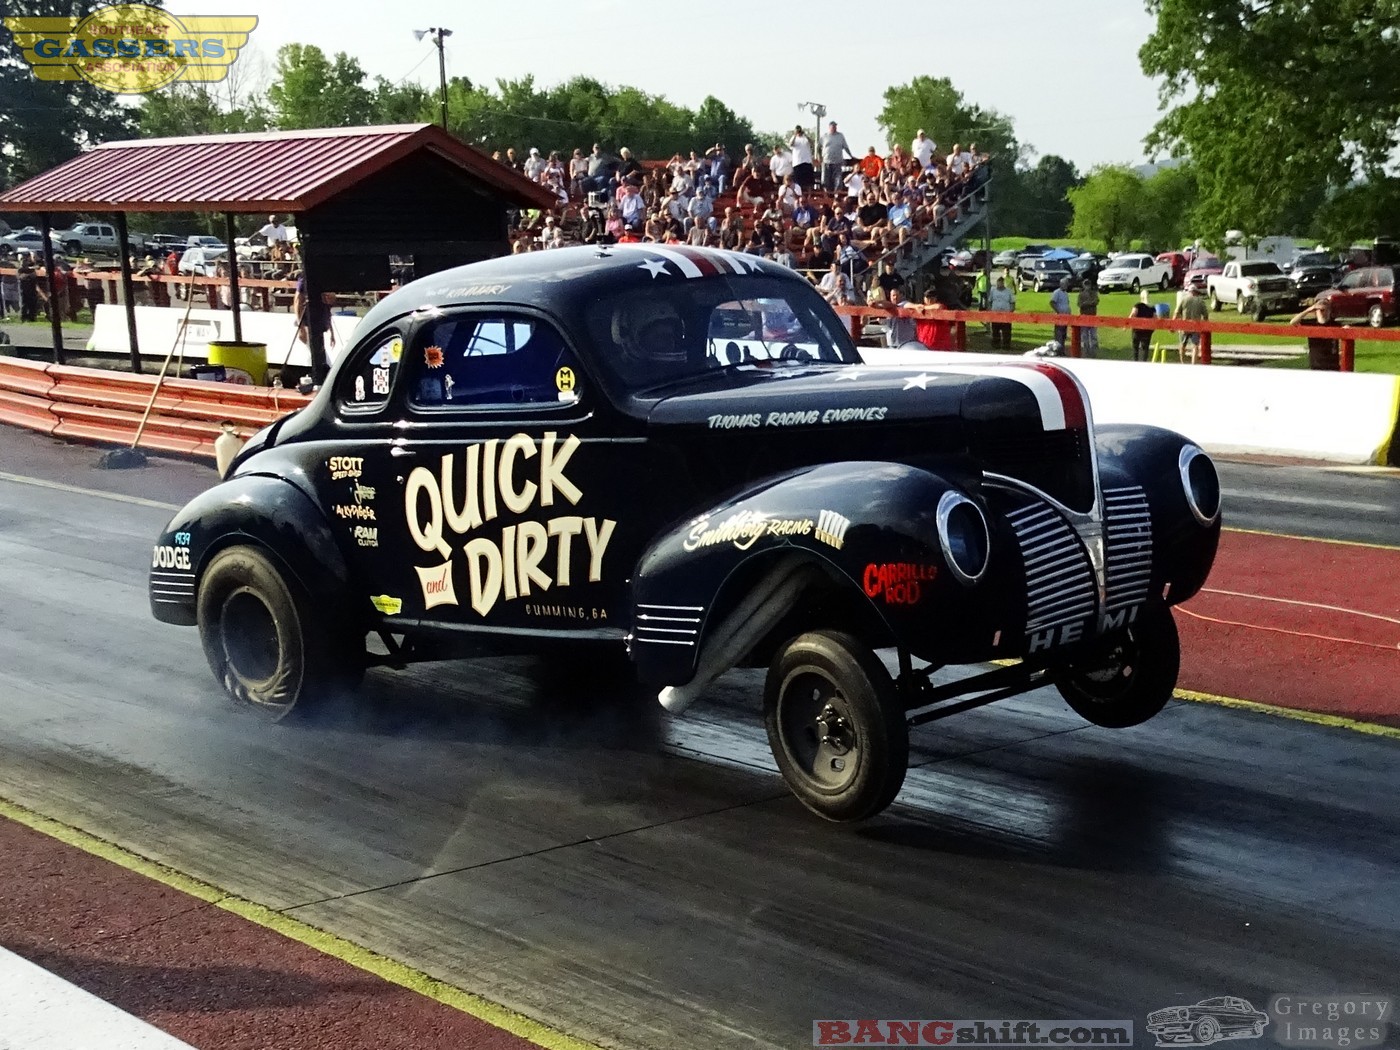 Southeast Gassers Photo Action! Check Out This Race Coverage and All The Killer Cars